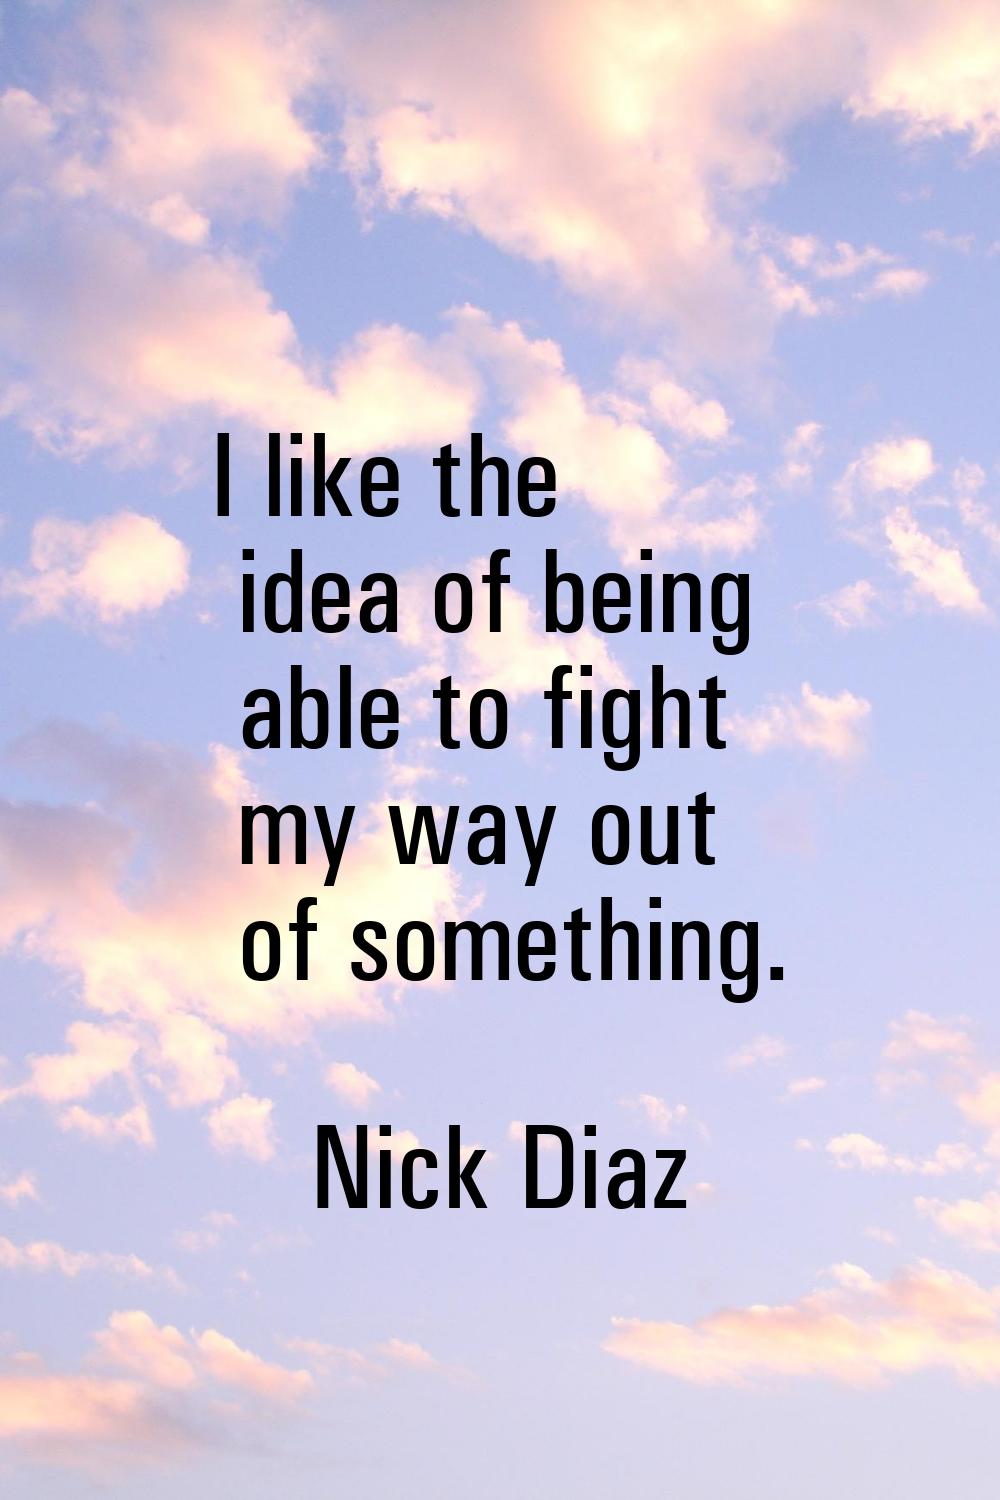 I like the idea of being able to fight my way out of something.